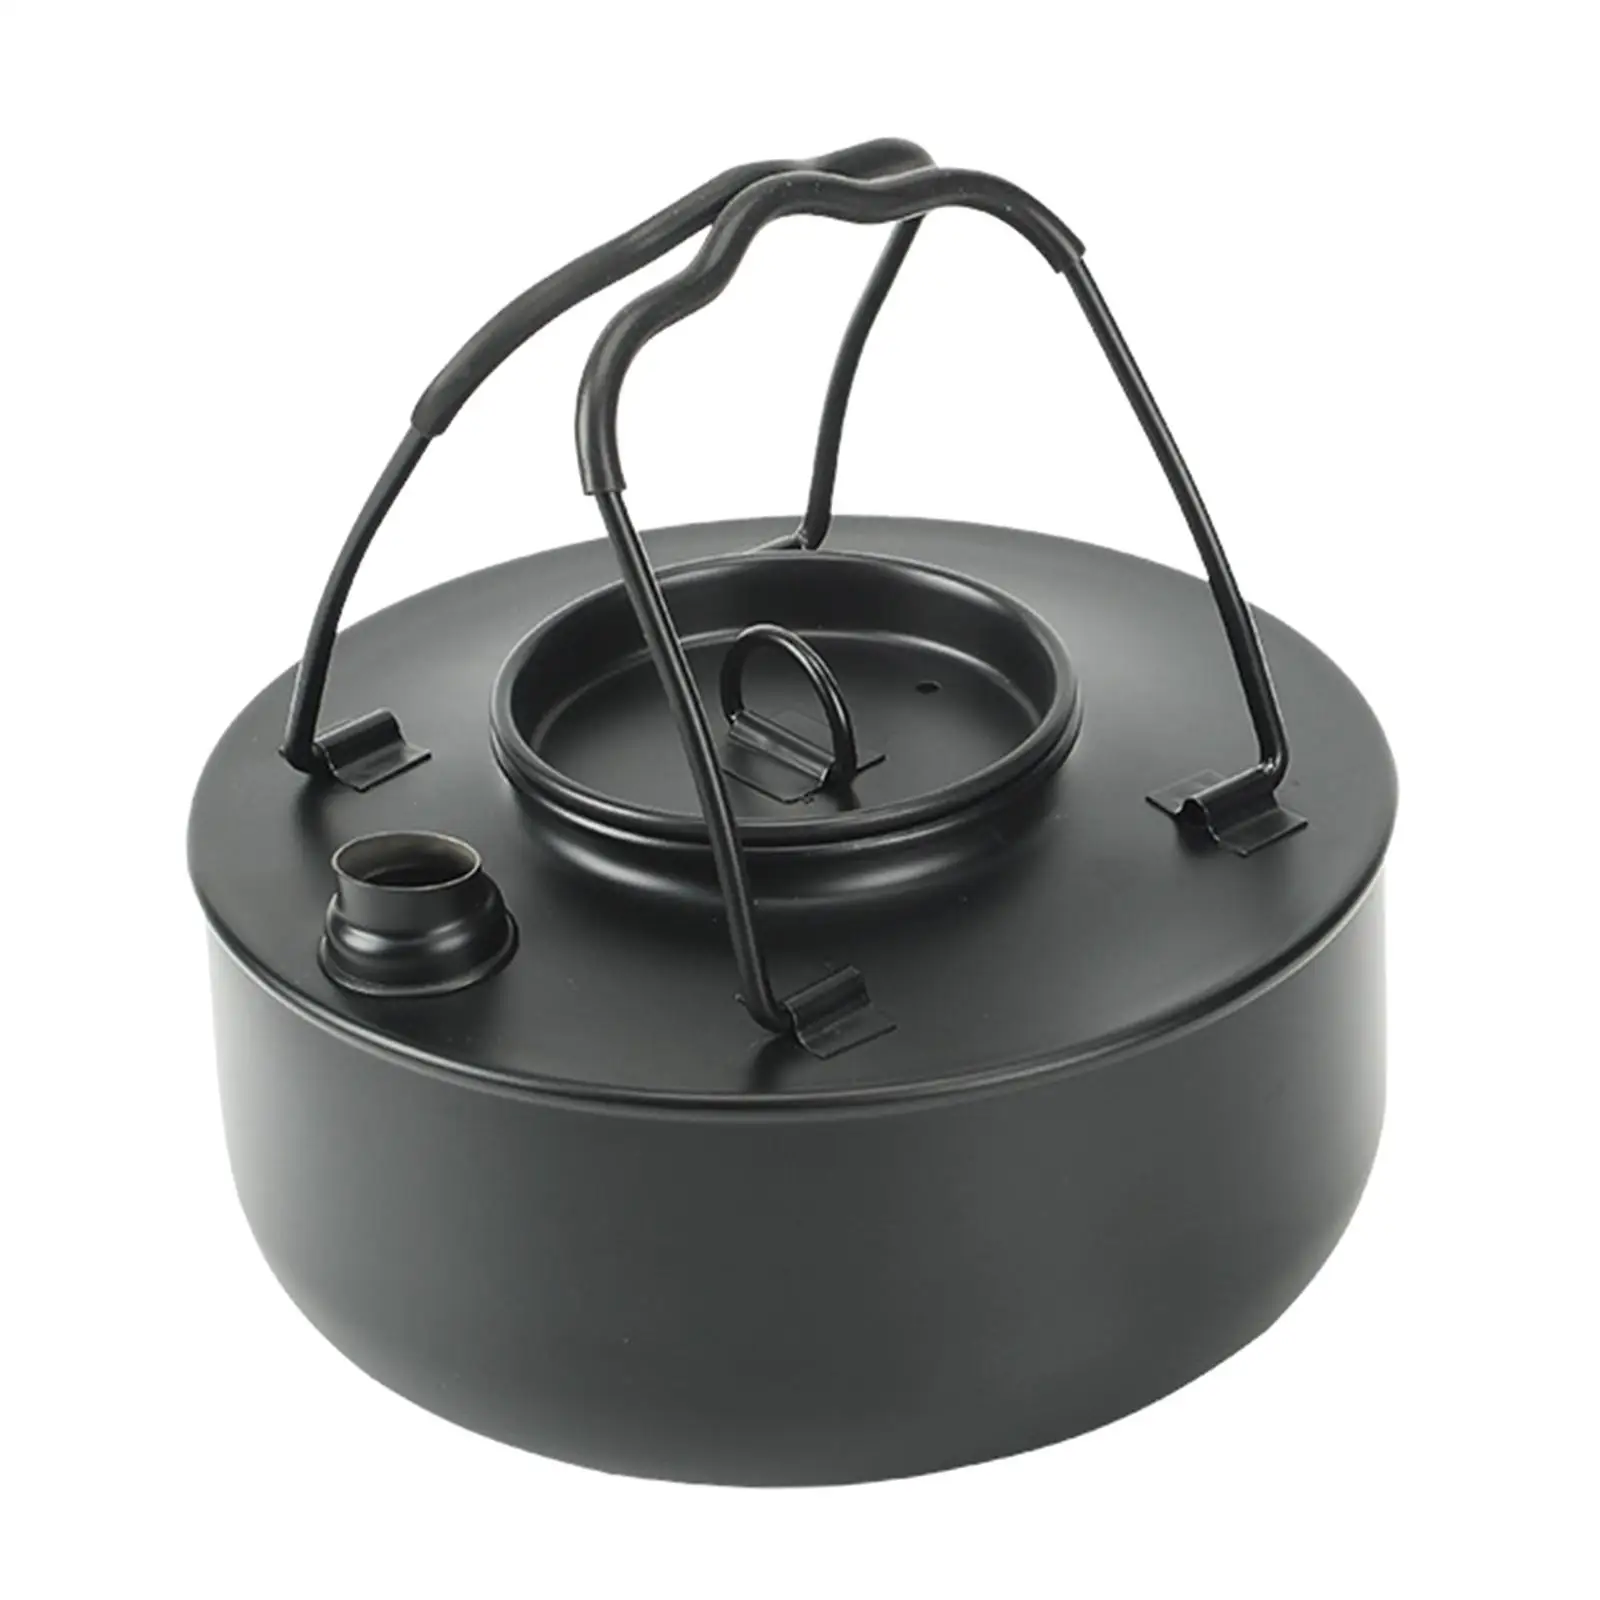 Outdoor Stove Pot Teapot Anti Scald Handle Camp Camping Kettle for Open Fire